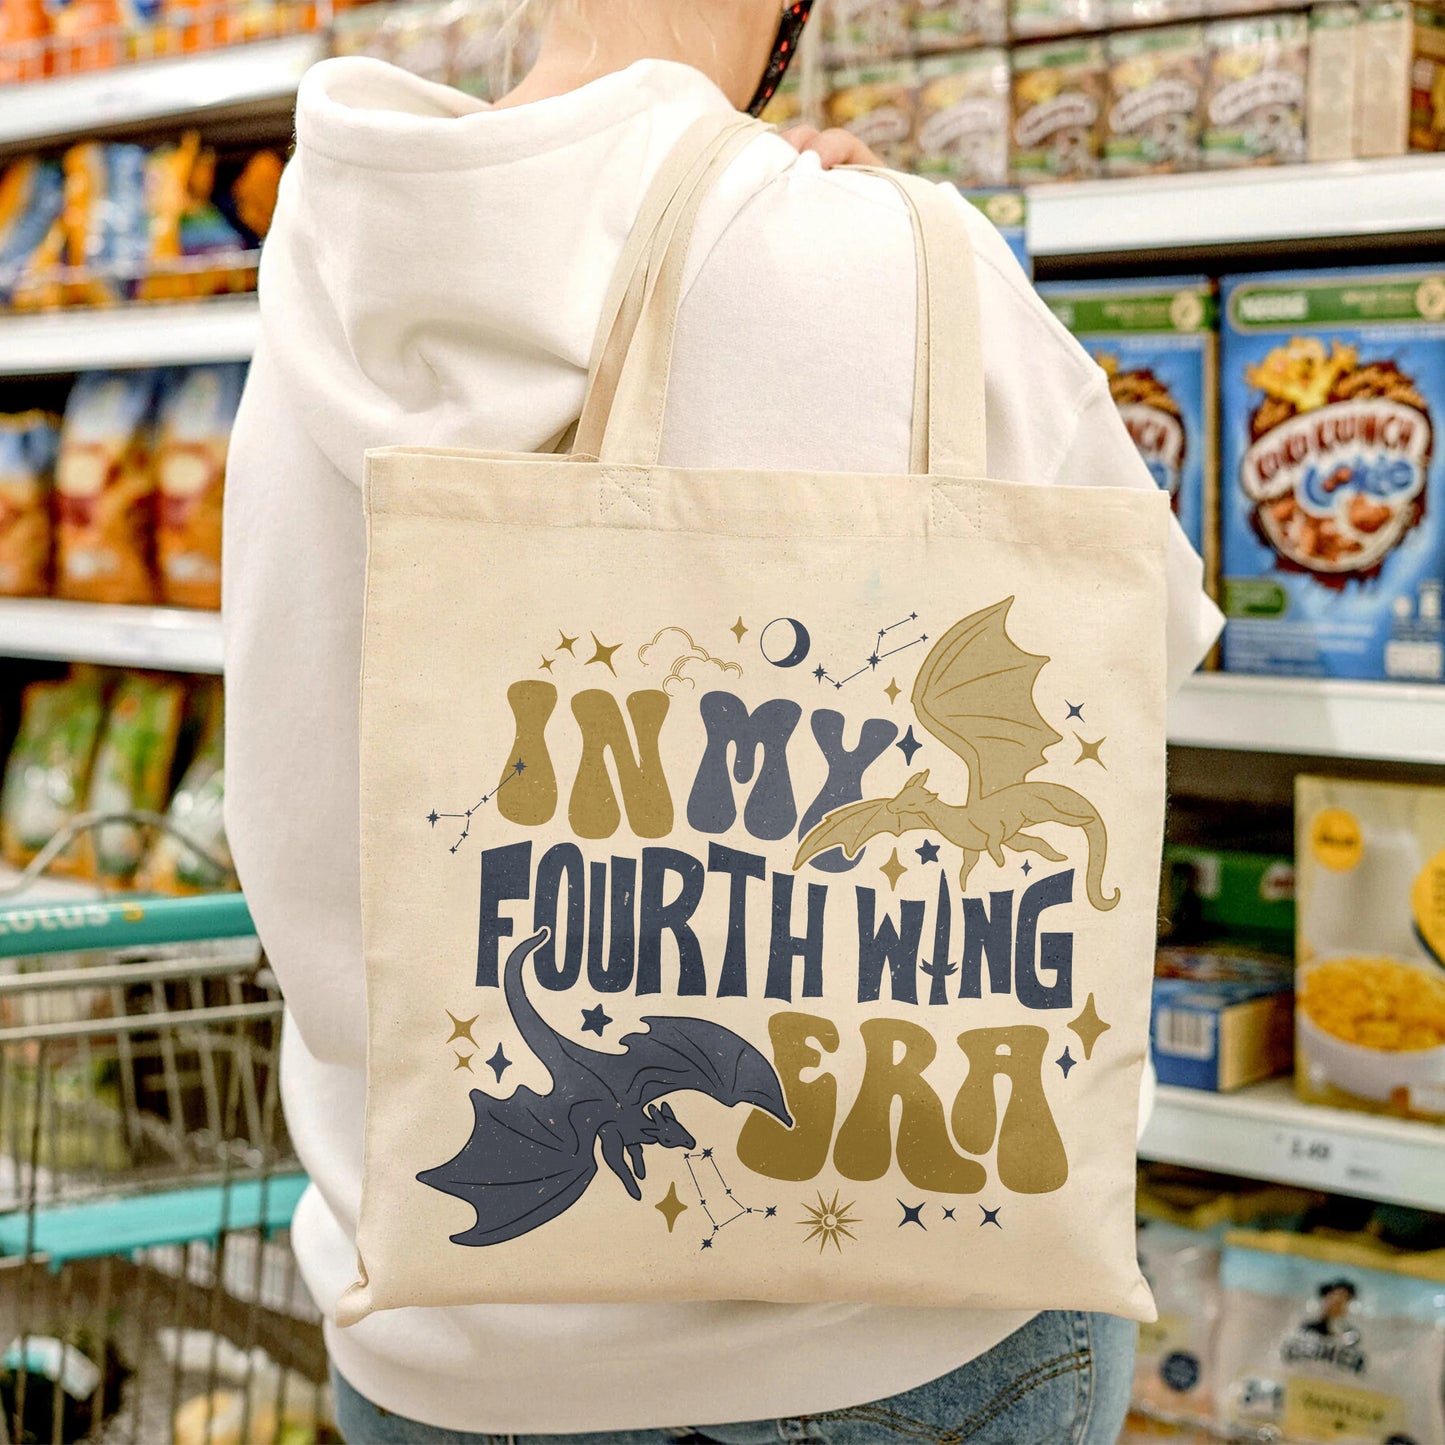 In My Fourth Wing Era Tote Bag, Fourth Wing Dragon Tote Bag